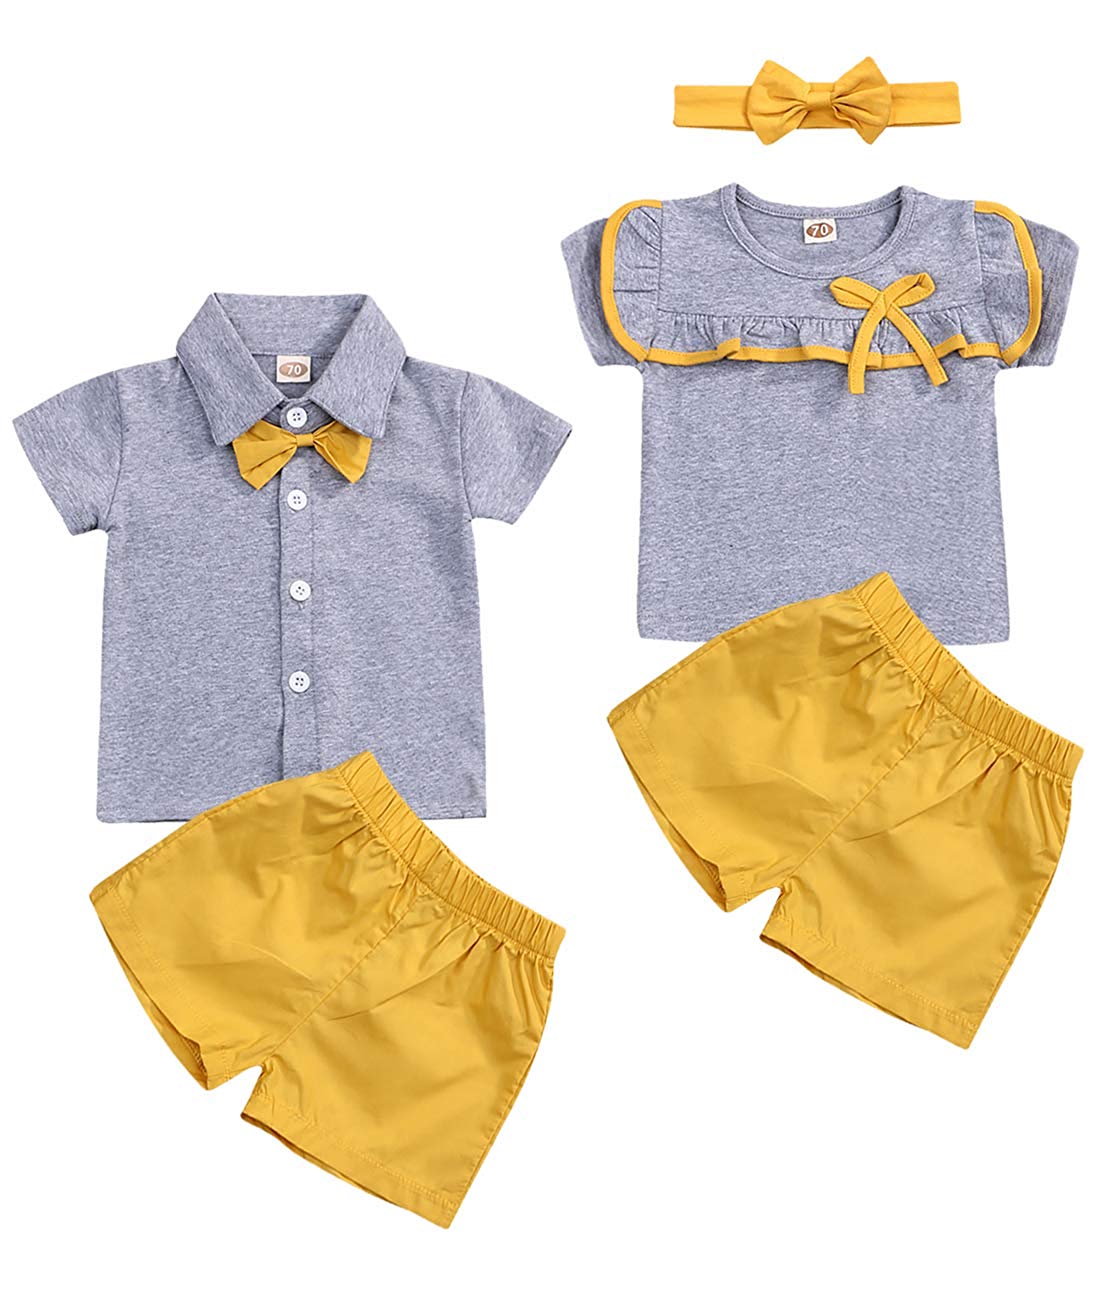 clothes for boy girl twins